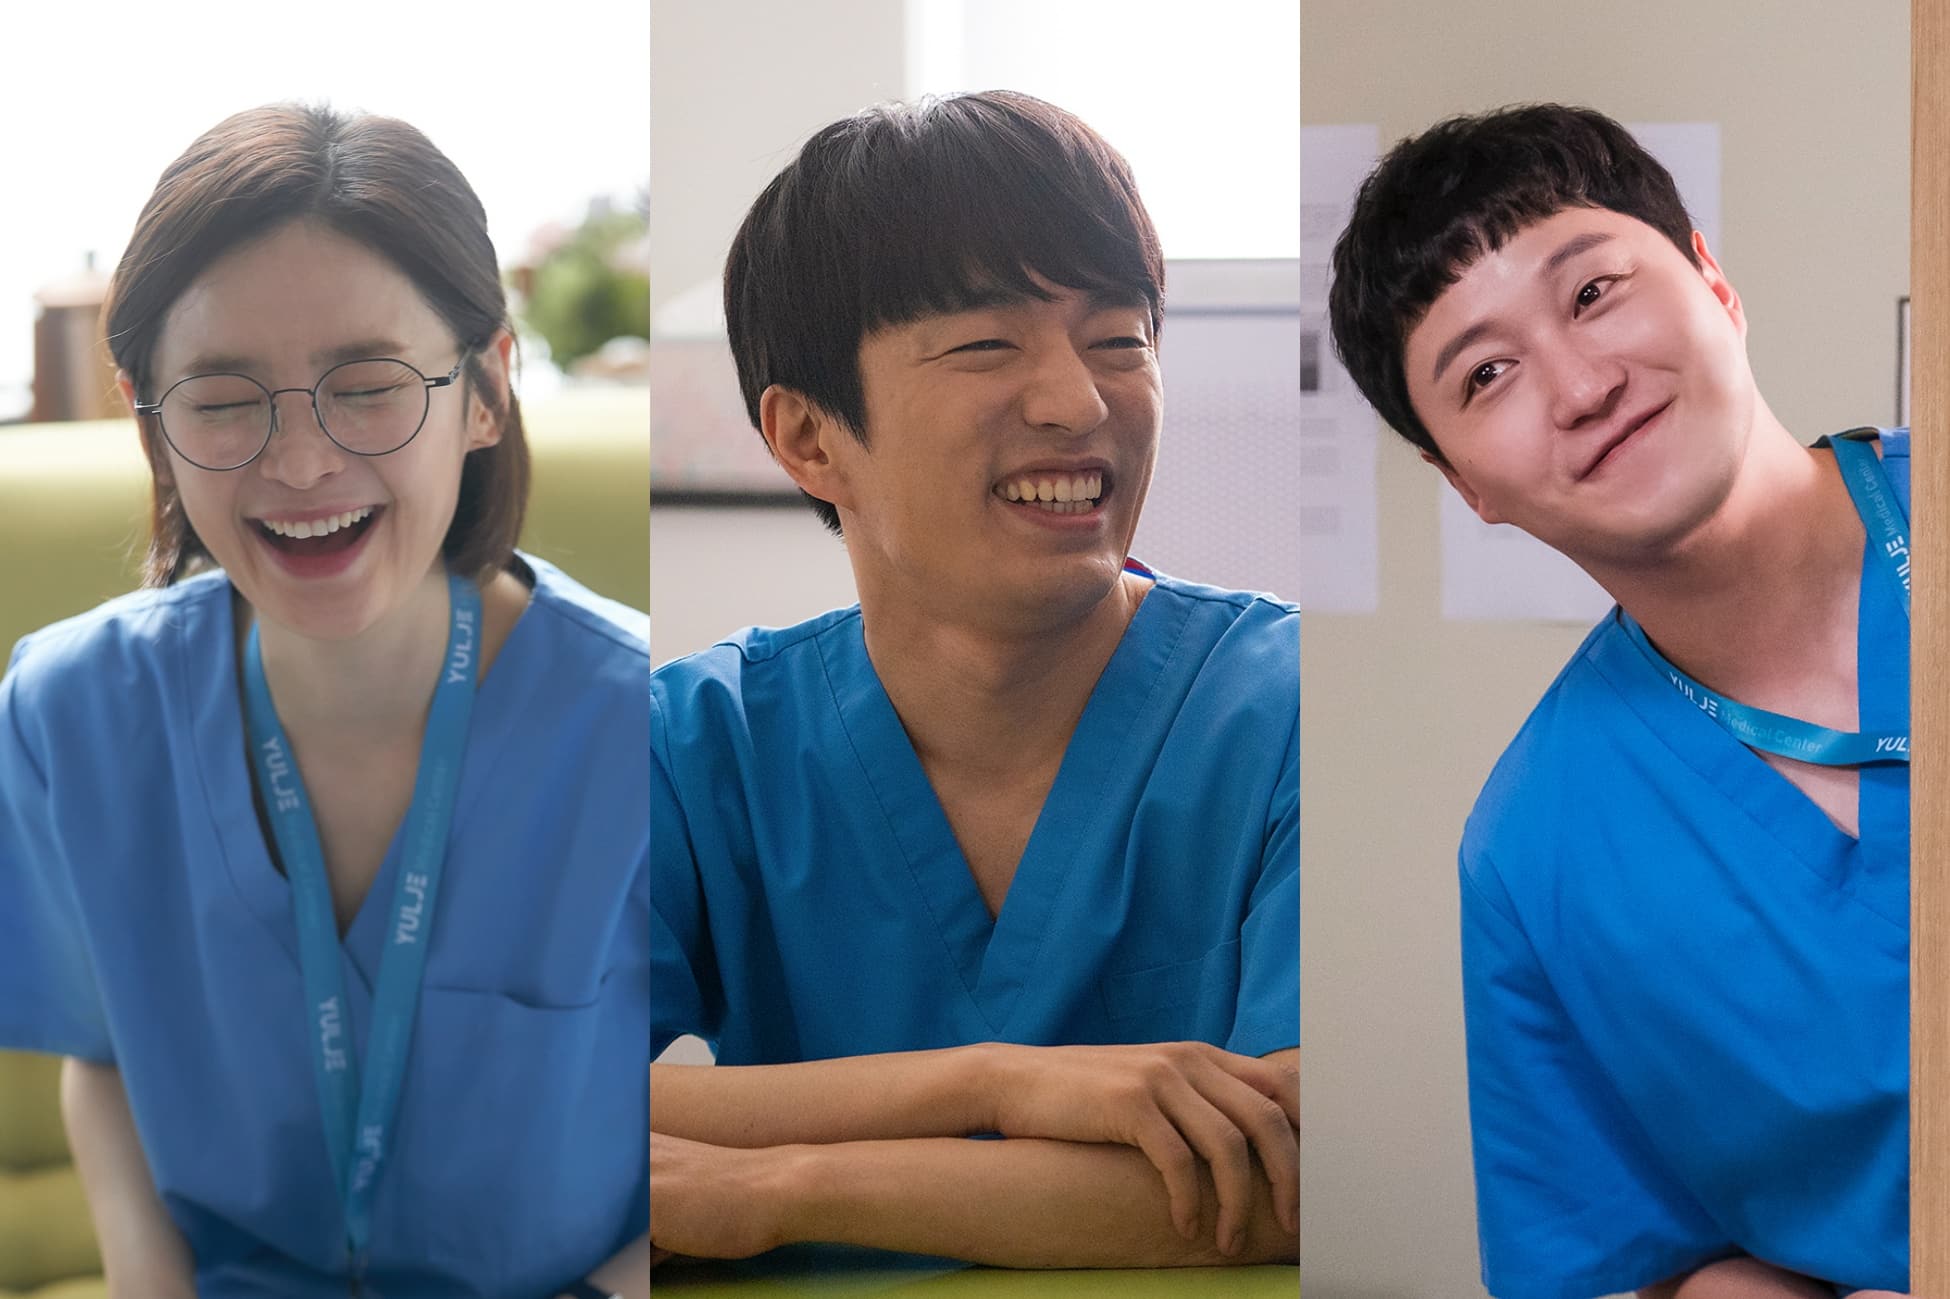 Things to look forward to in 'Hospital Playlist Season 2'